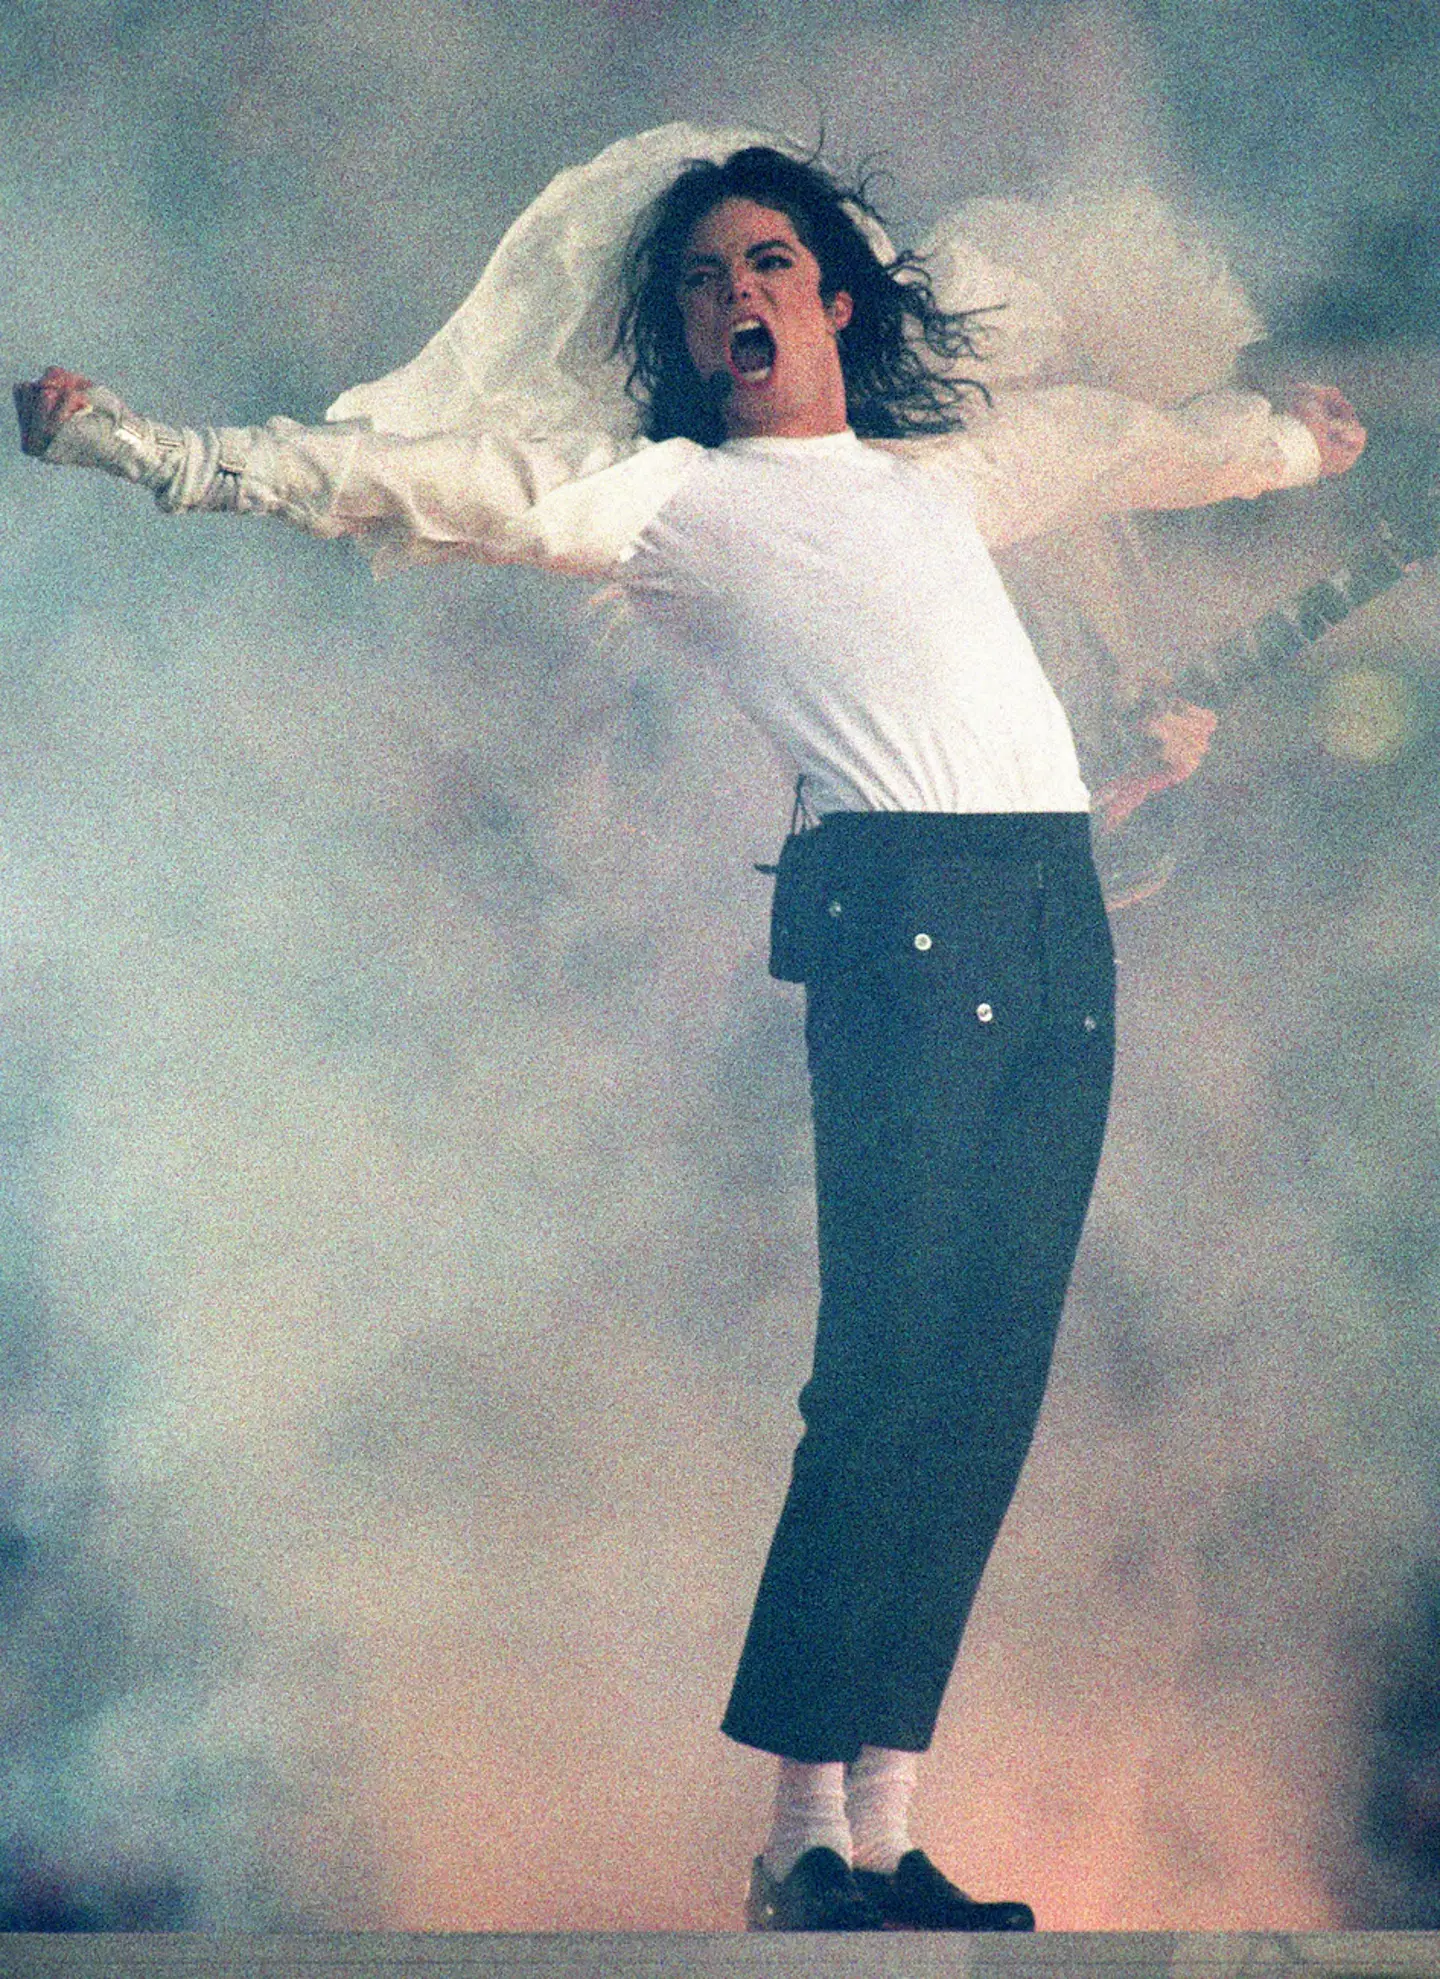 Michael Jackson performs during the 1993 Superbowl halftime show in Pasadena, California.